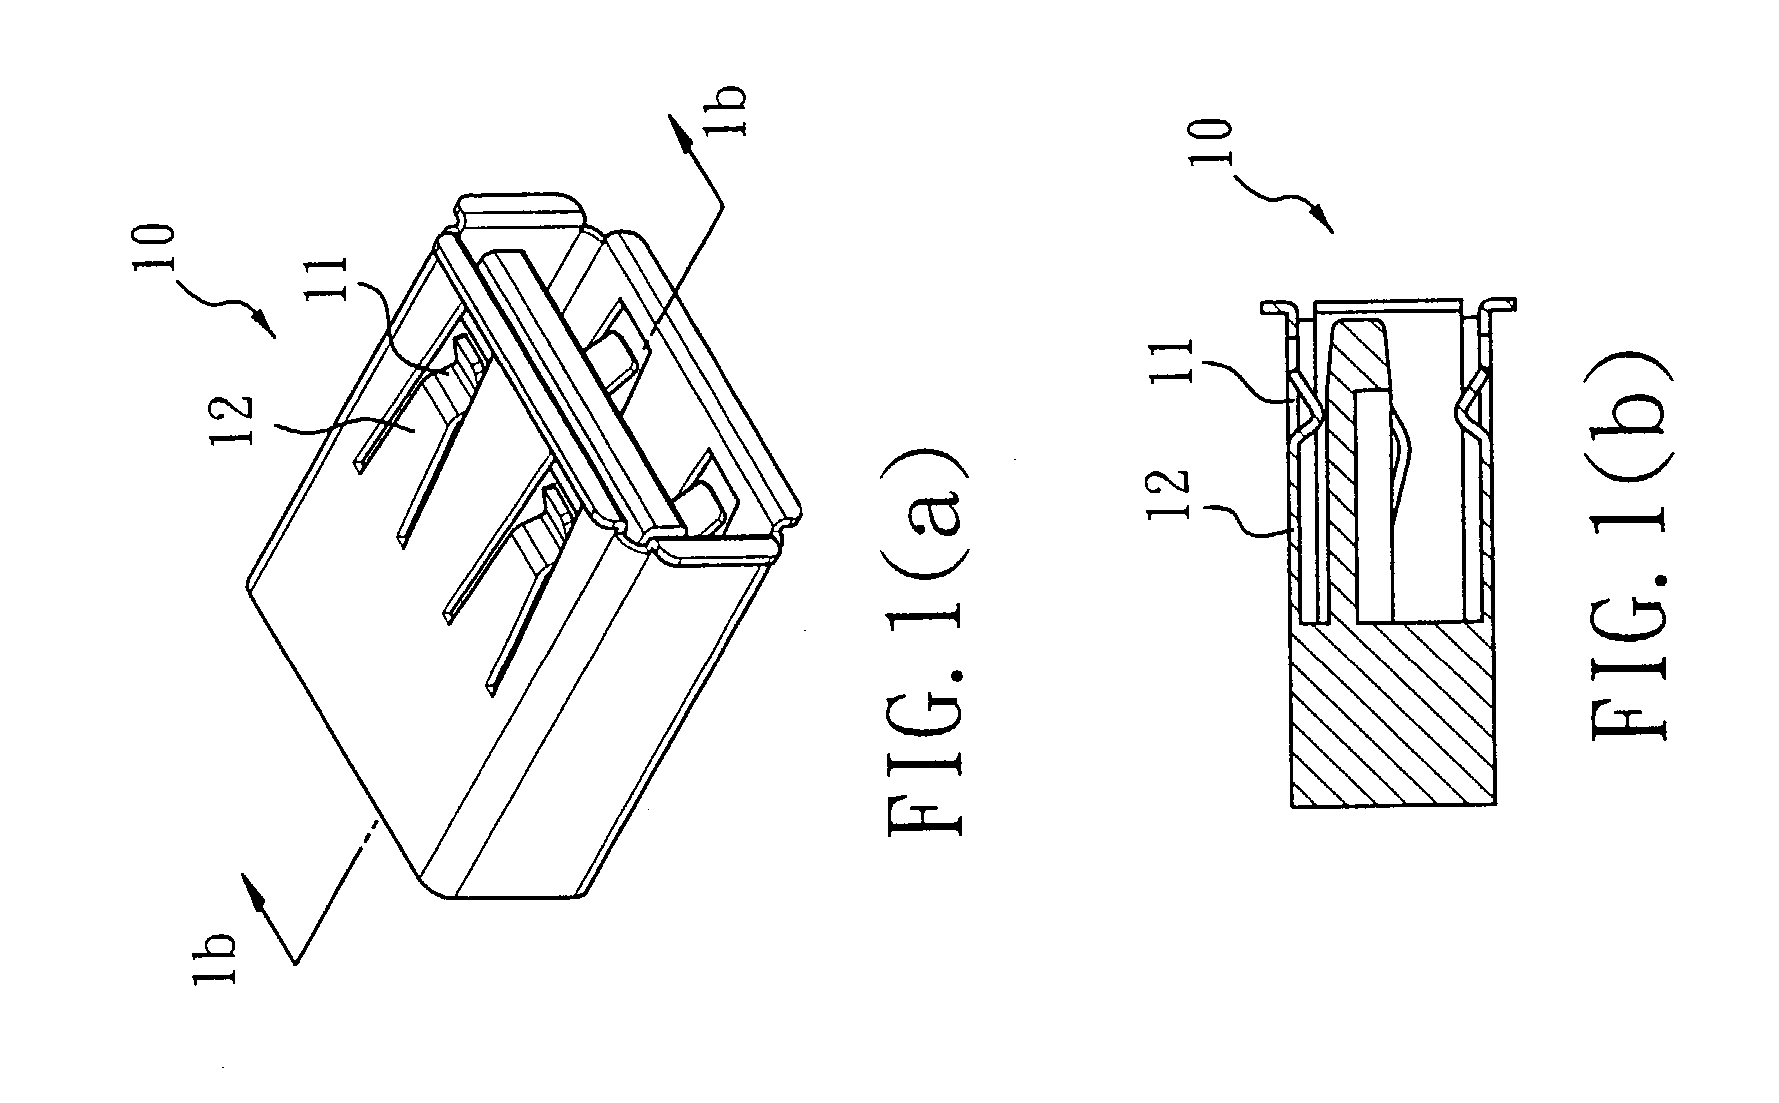 Plug socket securing device for use with plug socket having a slot formed by a resilient tab